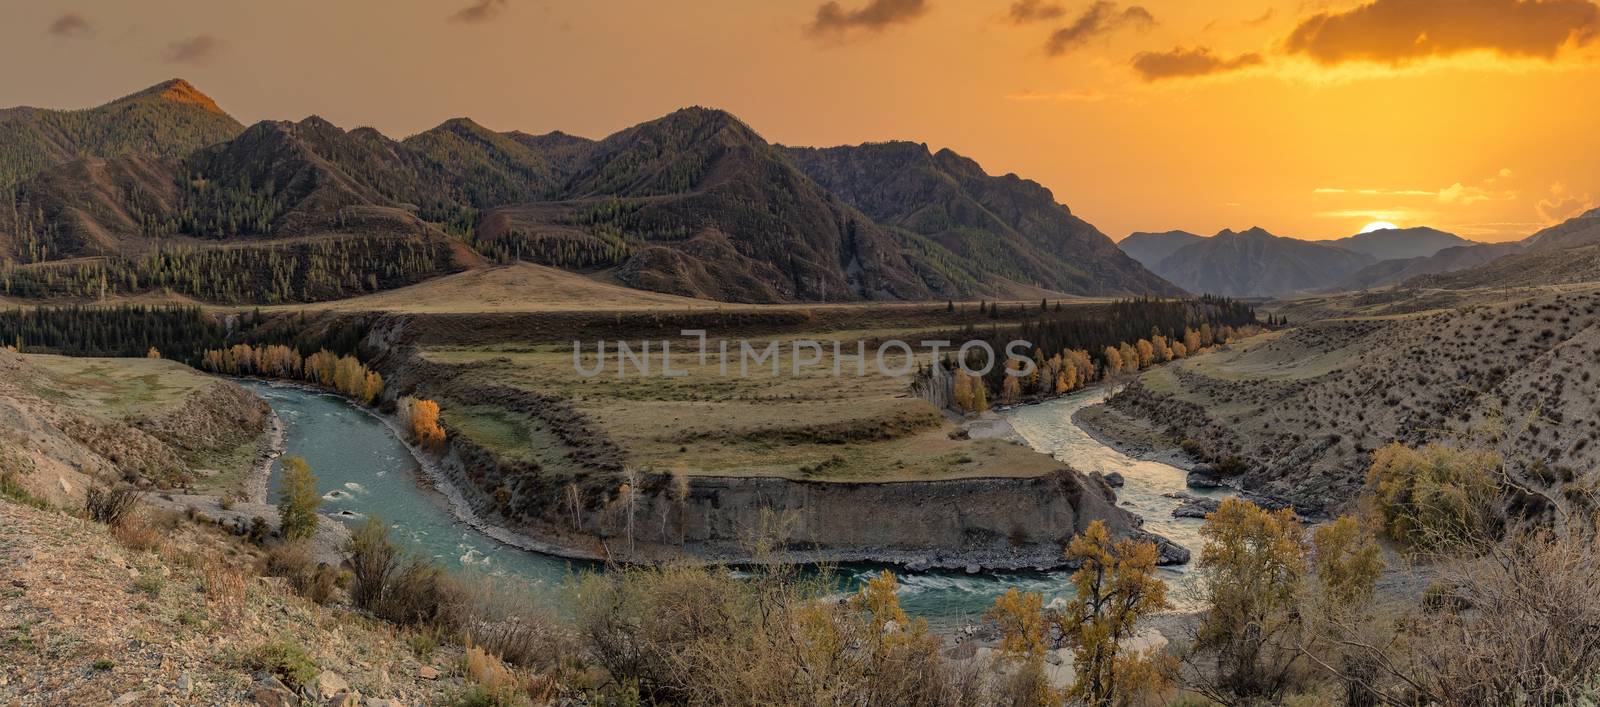 Altai mountains. Beautiful highland autumn panoramic landscape at sunset. Golden hour. Rocky foreground with golden trees and river. Beautiful golden sky and mountains as a background. Russia. Siberia